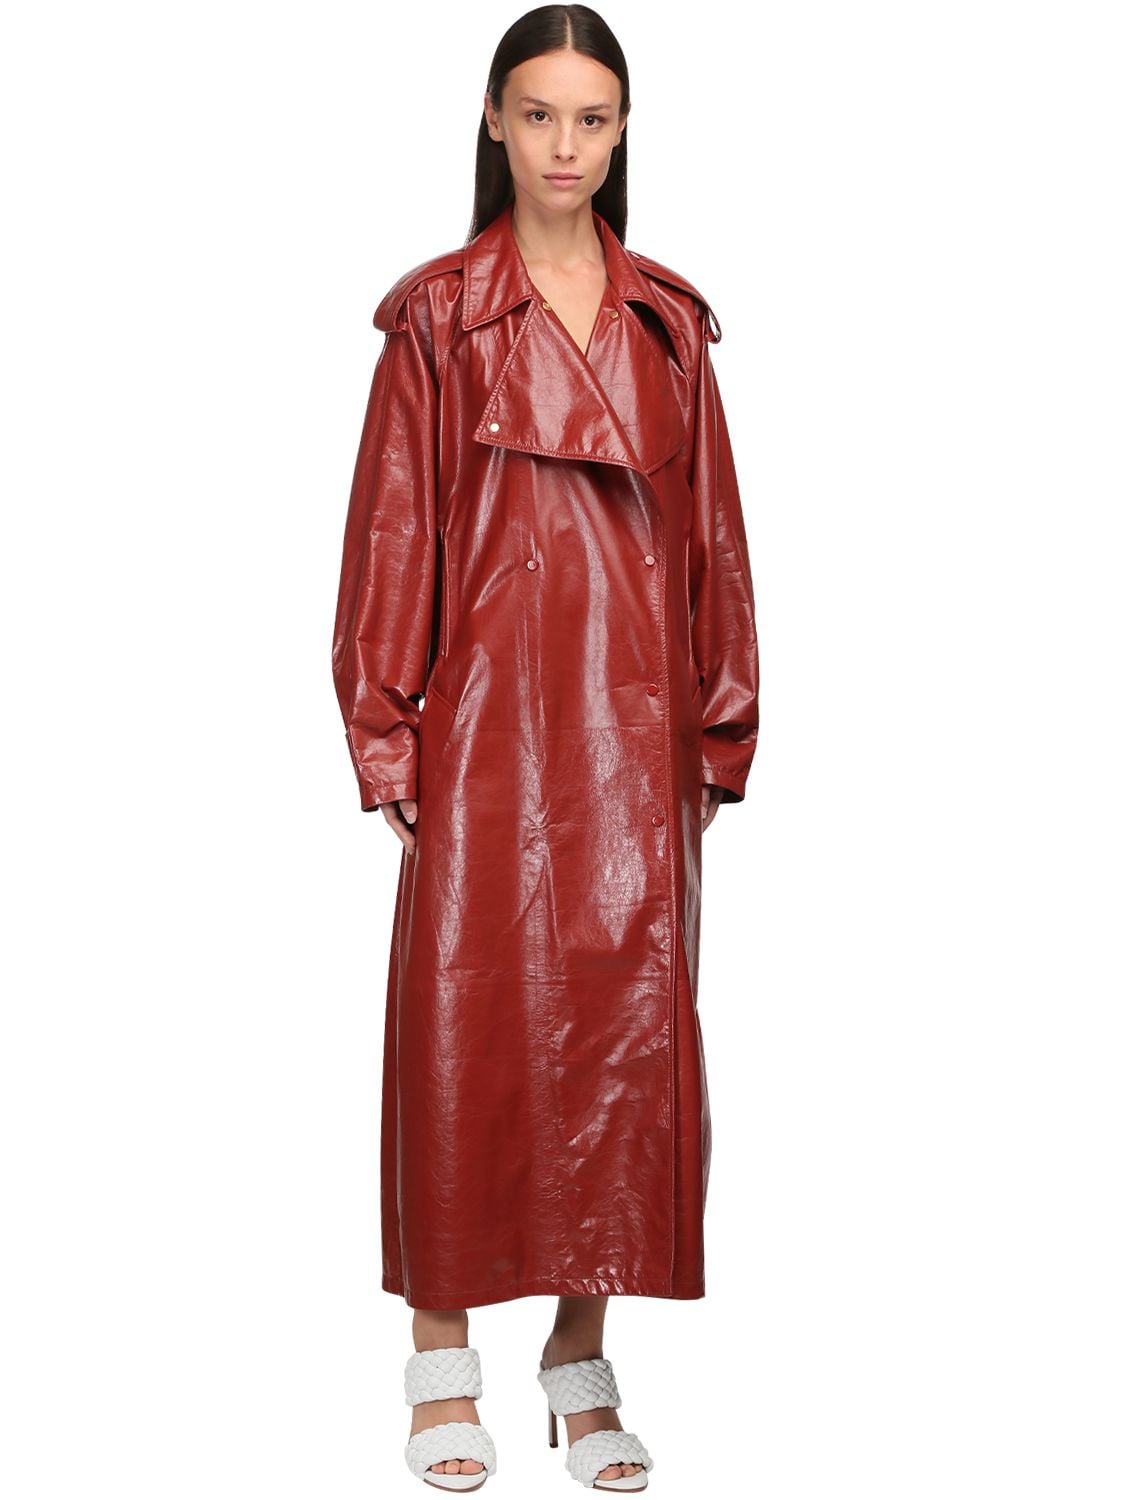 Nappa Leather Trench Coat